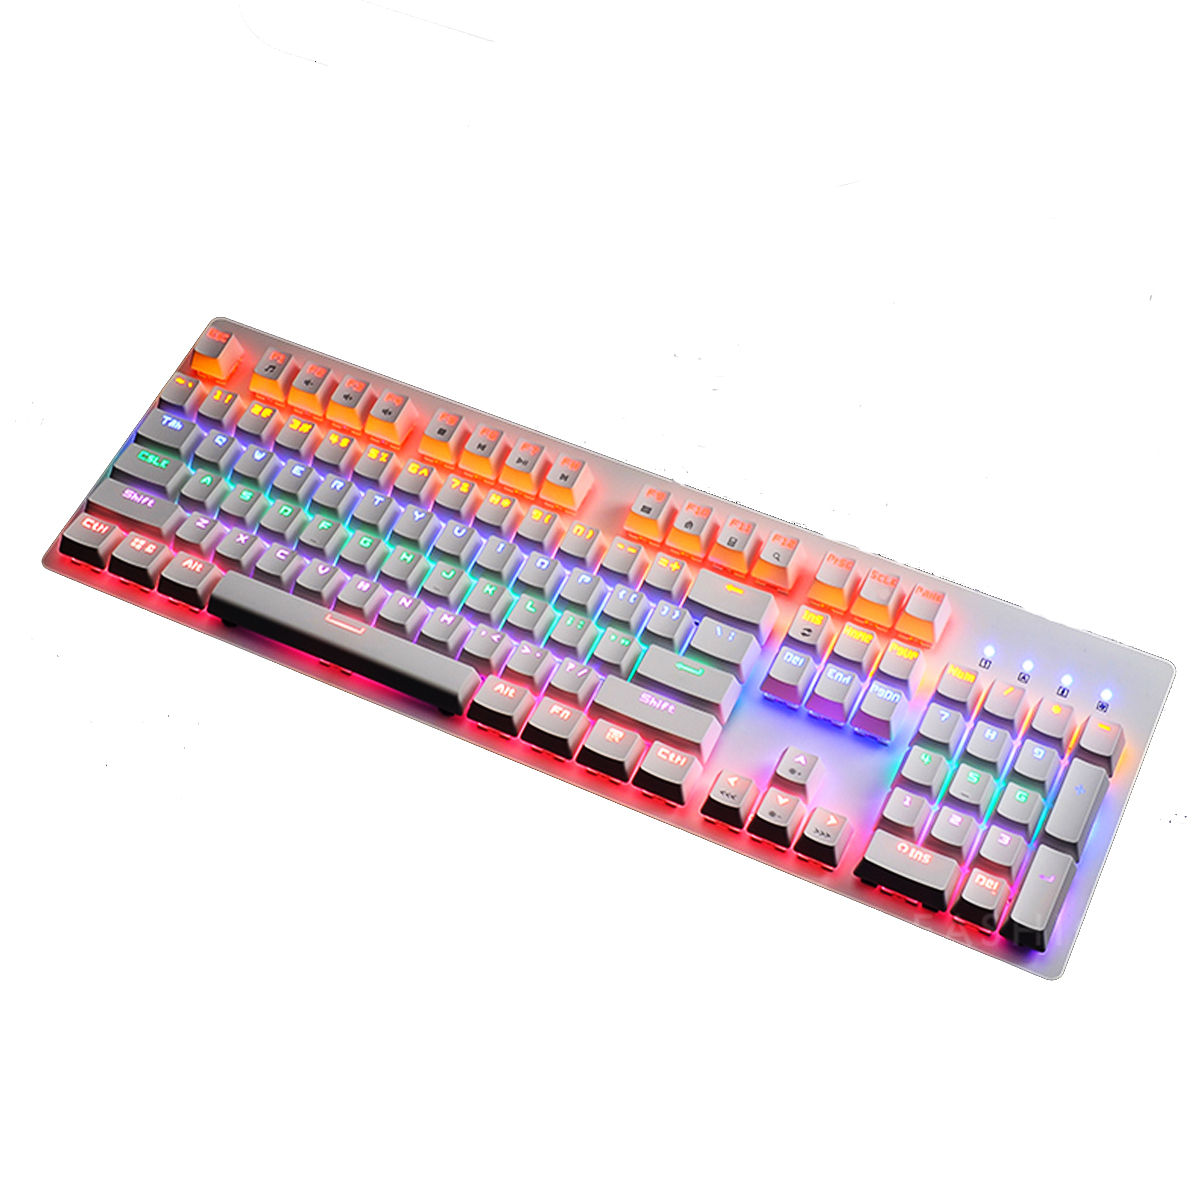 

Jagor Lolita 5 104Keys Colorful Backlit USB Wired White Mechanical Gaming Keyboard for Laptop PC